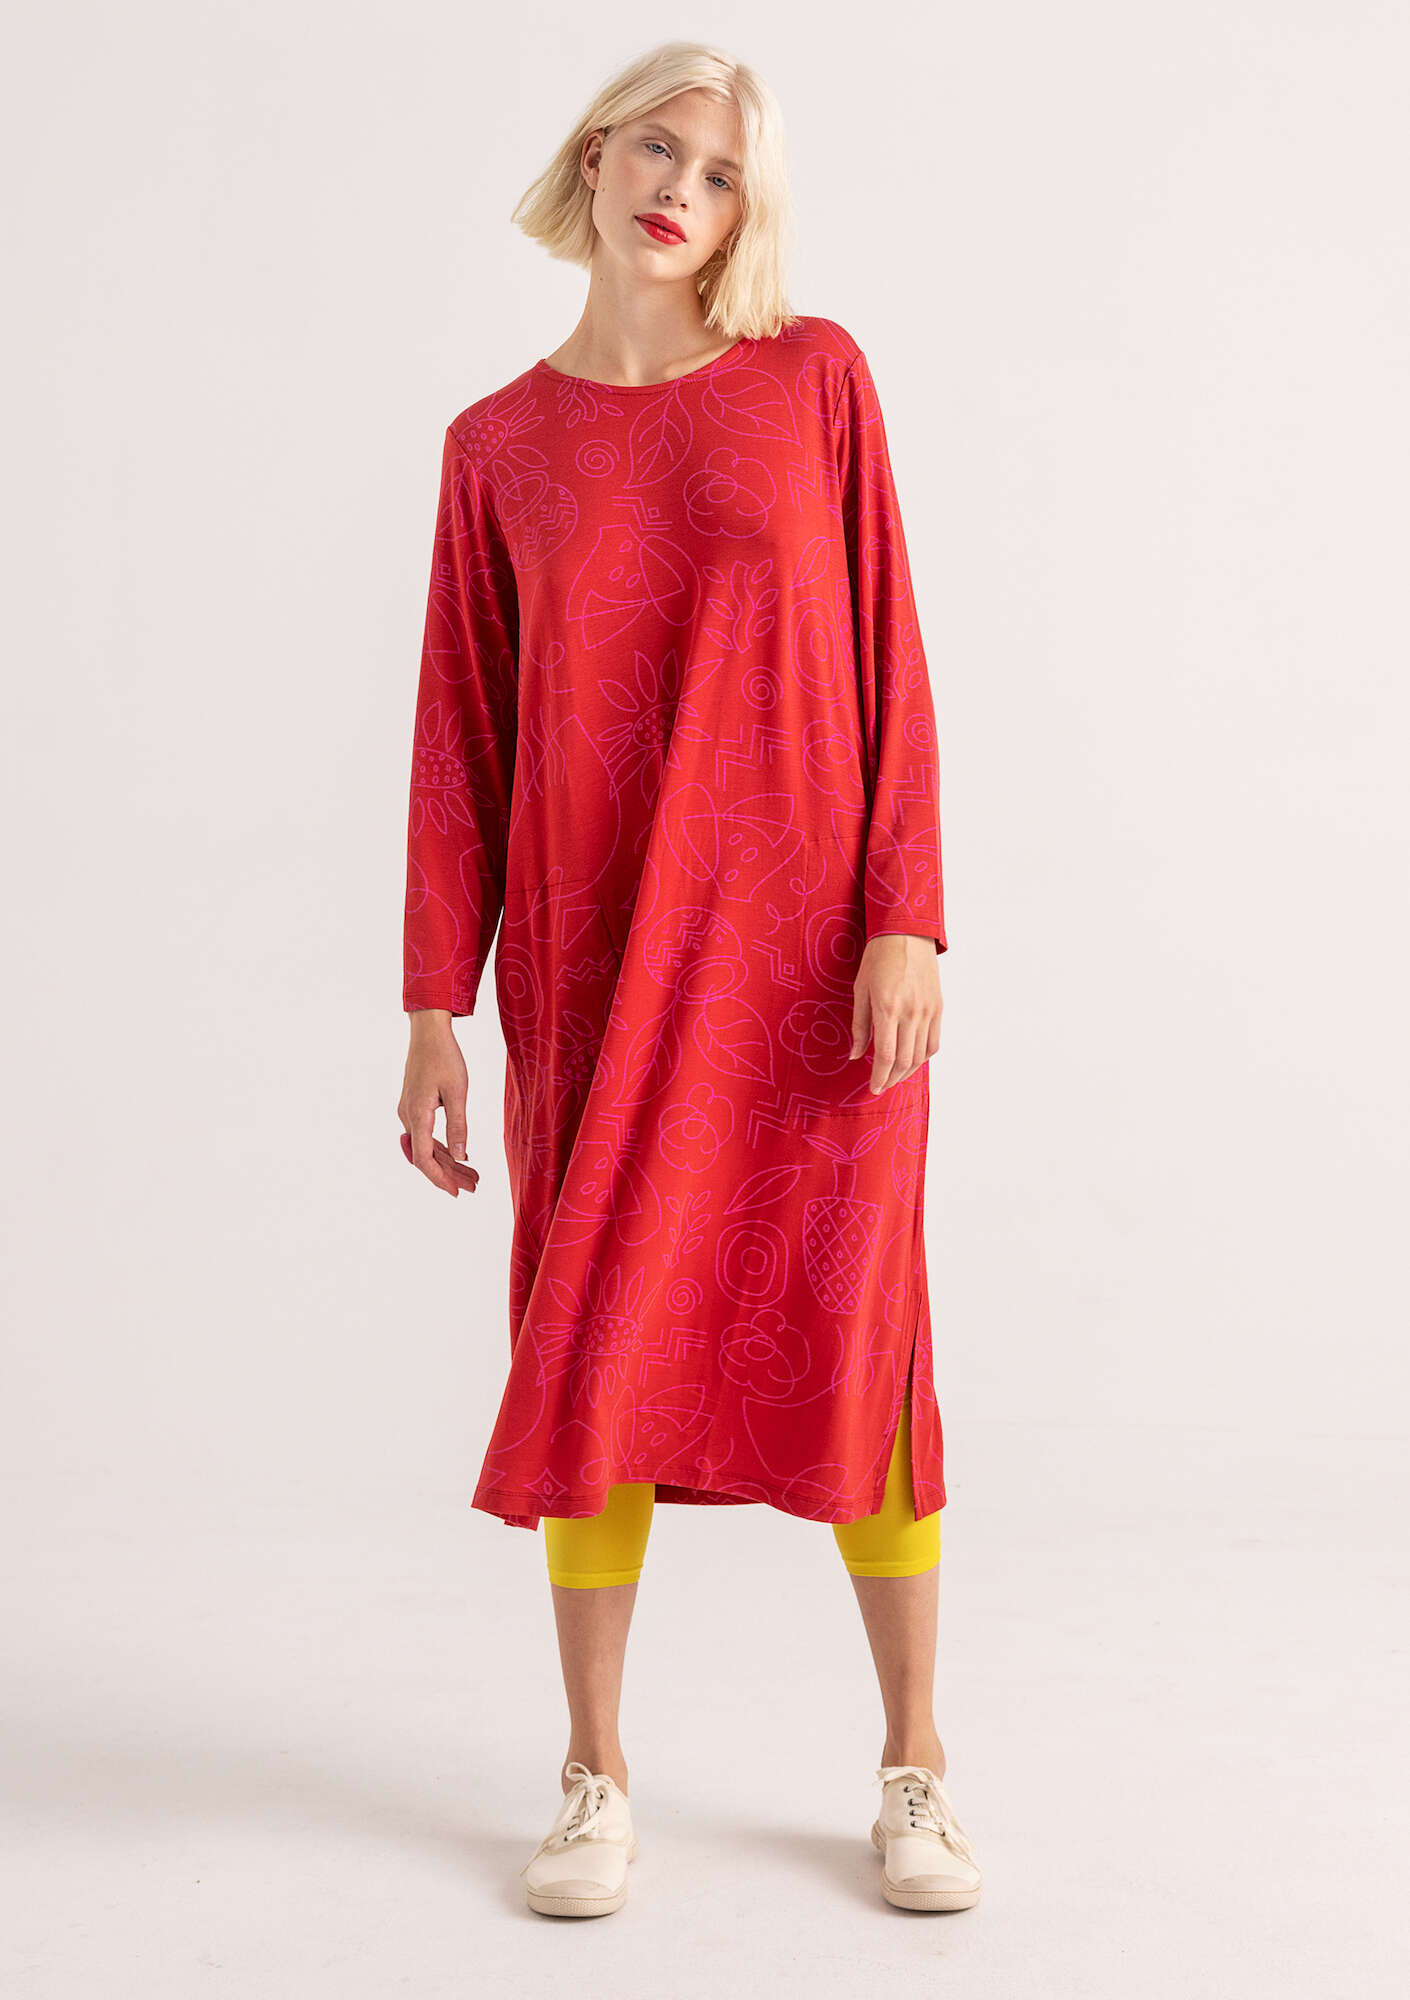 “Contour” jersey dress in lyocell/spandex parrot red